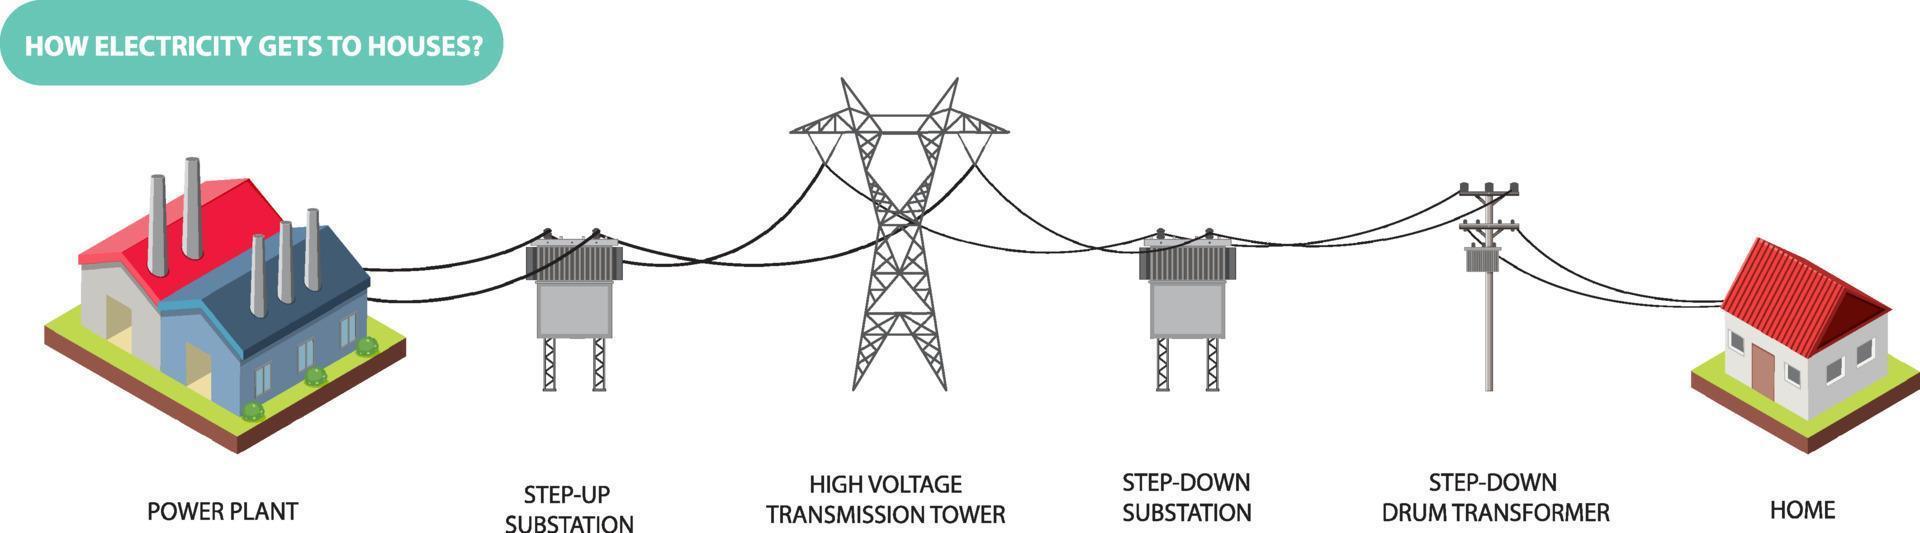 How electricity gets to house vector